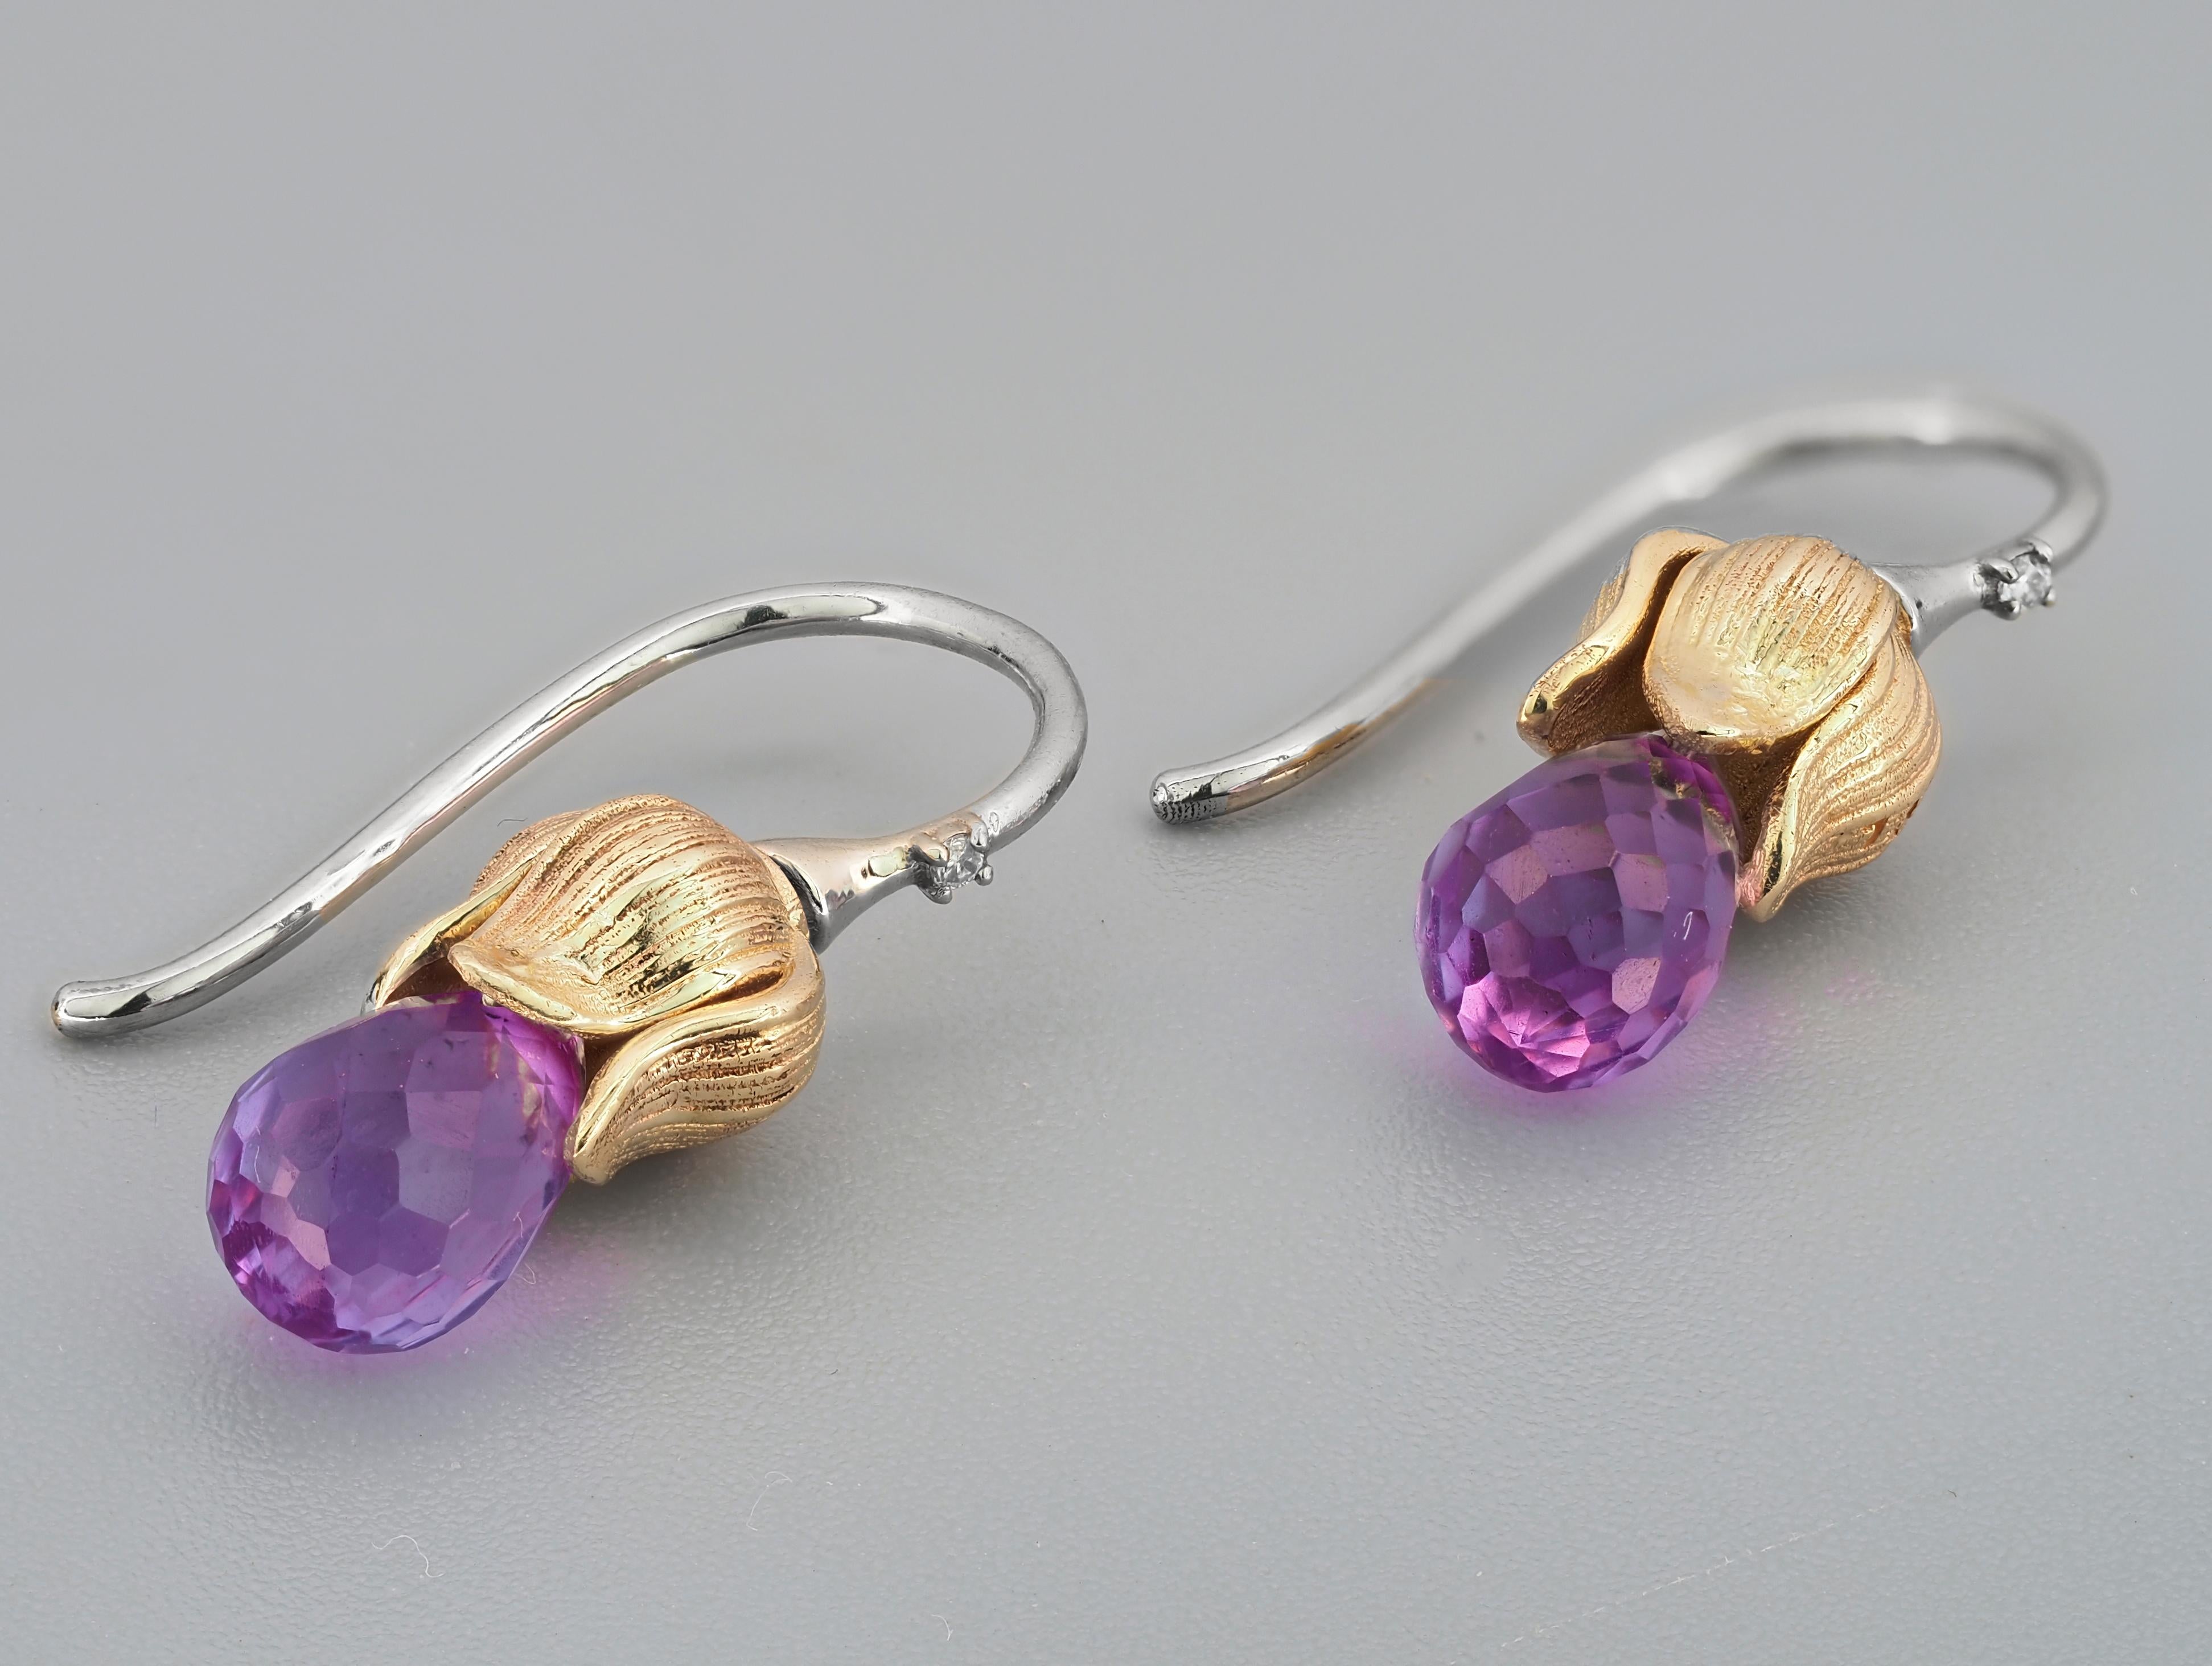 Amethyst and diamonds earrings. 
Briolette amethyst earrings. Gold drop earrings. Flower gold earrings with amethyst. February birthstone.

Size: 21x6mm.
Gold color yellow and white - 14k marked.
Weight: - 2.55 g.

Amethysts 2 pieces - violet color,